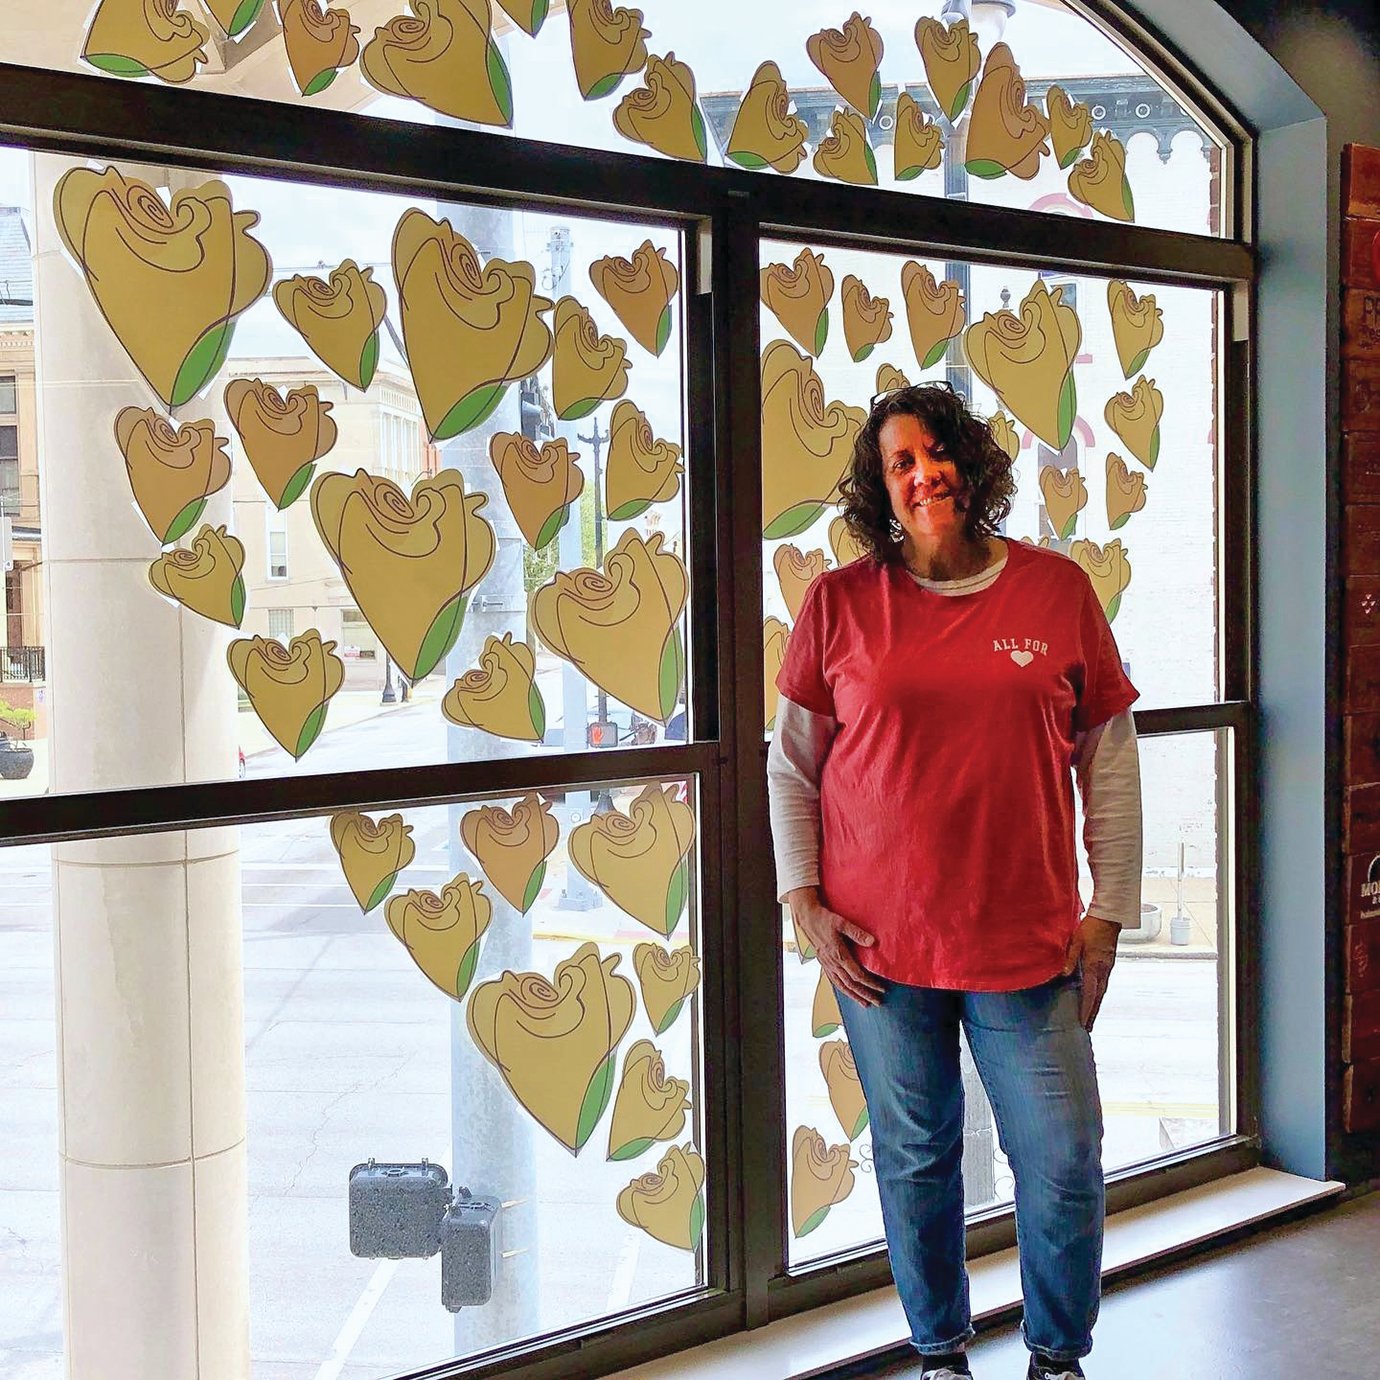 Local artist Nina Cunningham completes her heart-shaped design of yellow roses April 26 on the second floor of the Fusion 54 building to show support for small businesses around Crawfordsville.